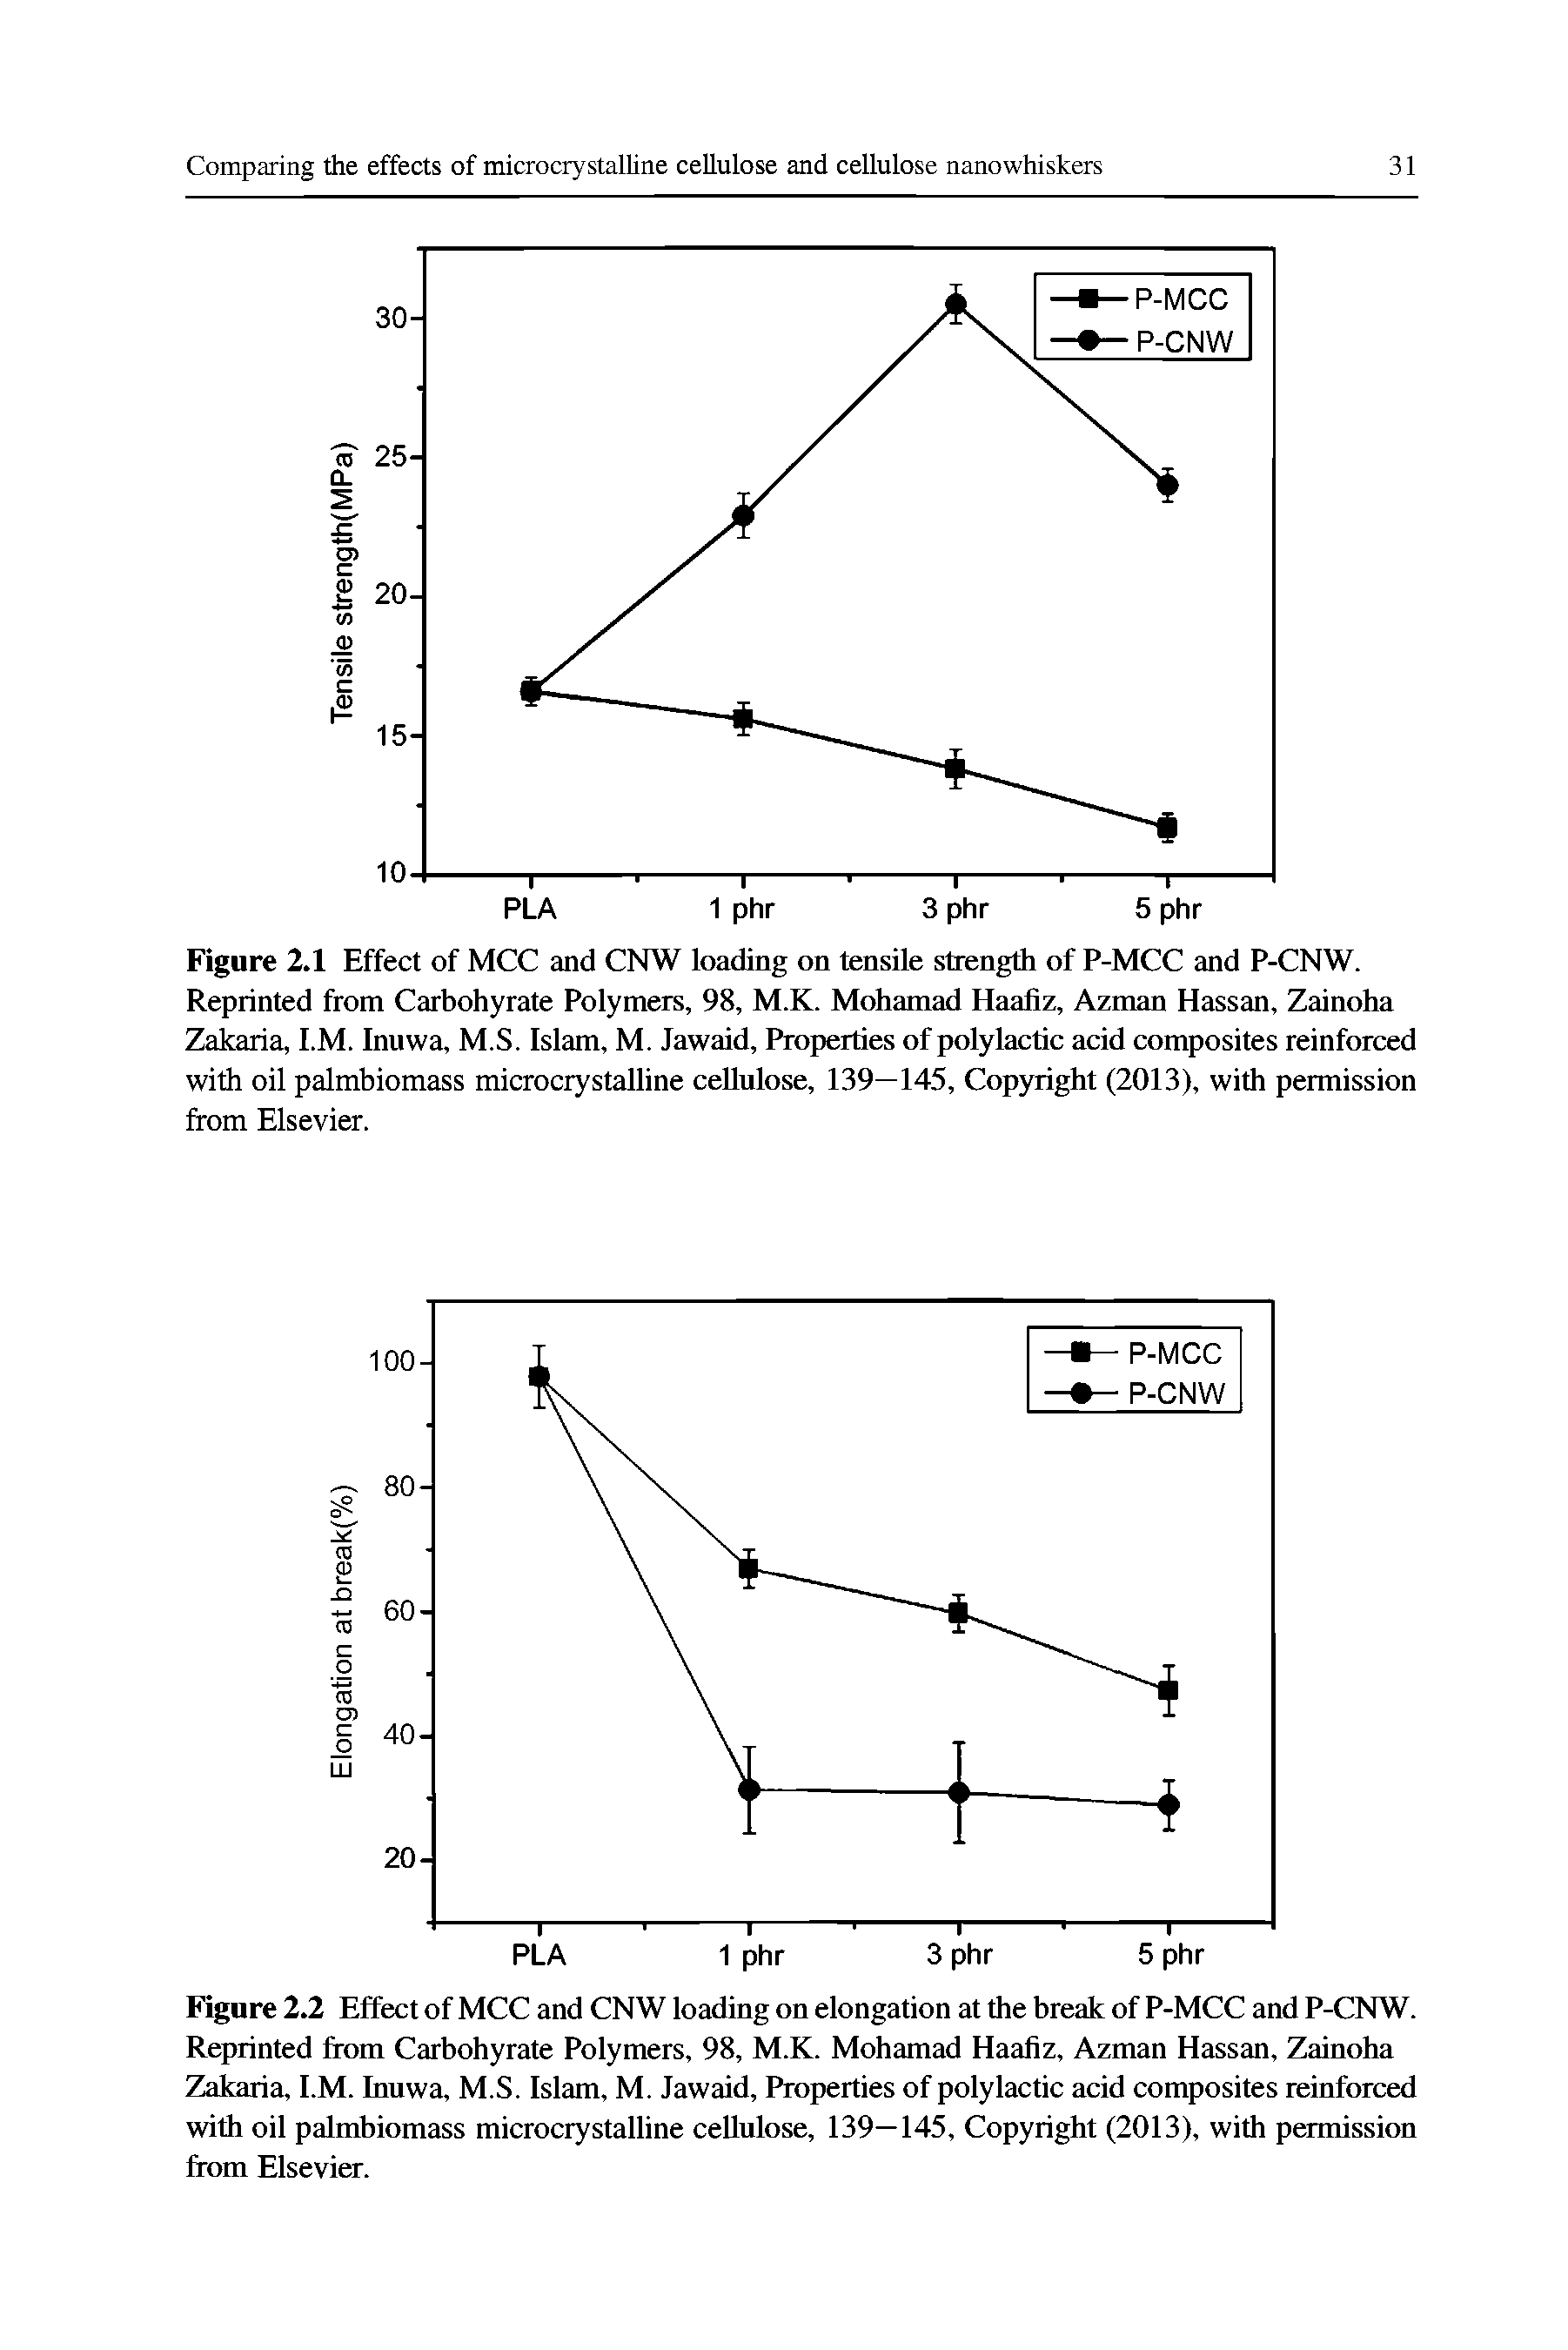 Figure 2.1 Effect of MCC and CNW loading on tensile strength of P-MCC and P-CNW. Reprinted from Carbohyrate Polymers, 98, M.K. Mohamad Haafiz, Azman Hassan, Zainoha Zakaria, I.M. Inuwa, M.S. Islam, M. Jawaid, Properties of polylactic acid composites reinforced with oil palmbiomass microcrystalline cellulose, 139—145, Copyright (2013), with permission from Elsevier.